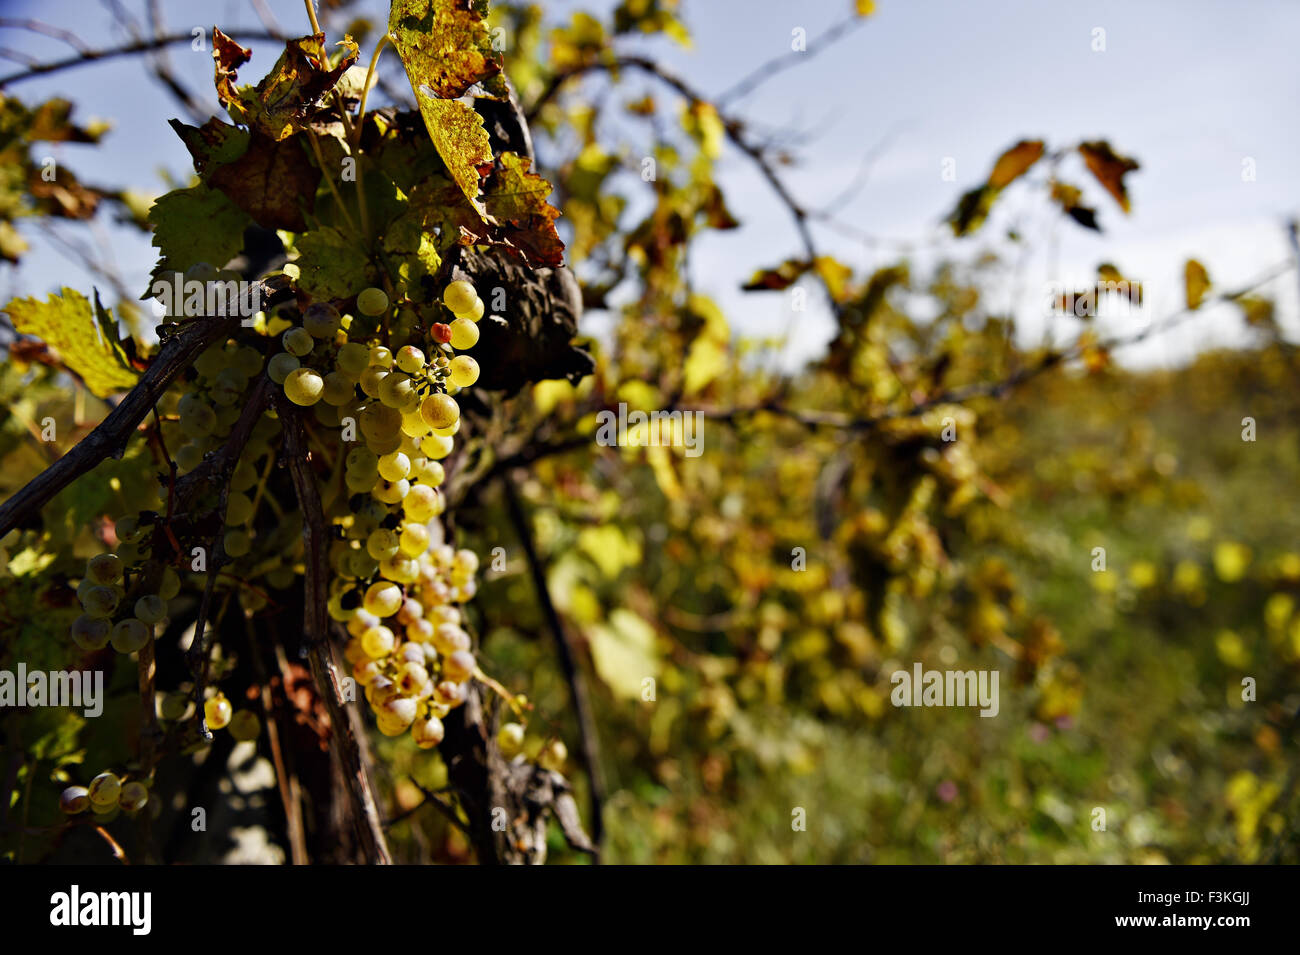 White grapes in a vineyard on a sunny day in late autumn harvest Stock Photo